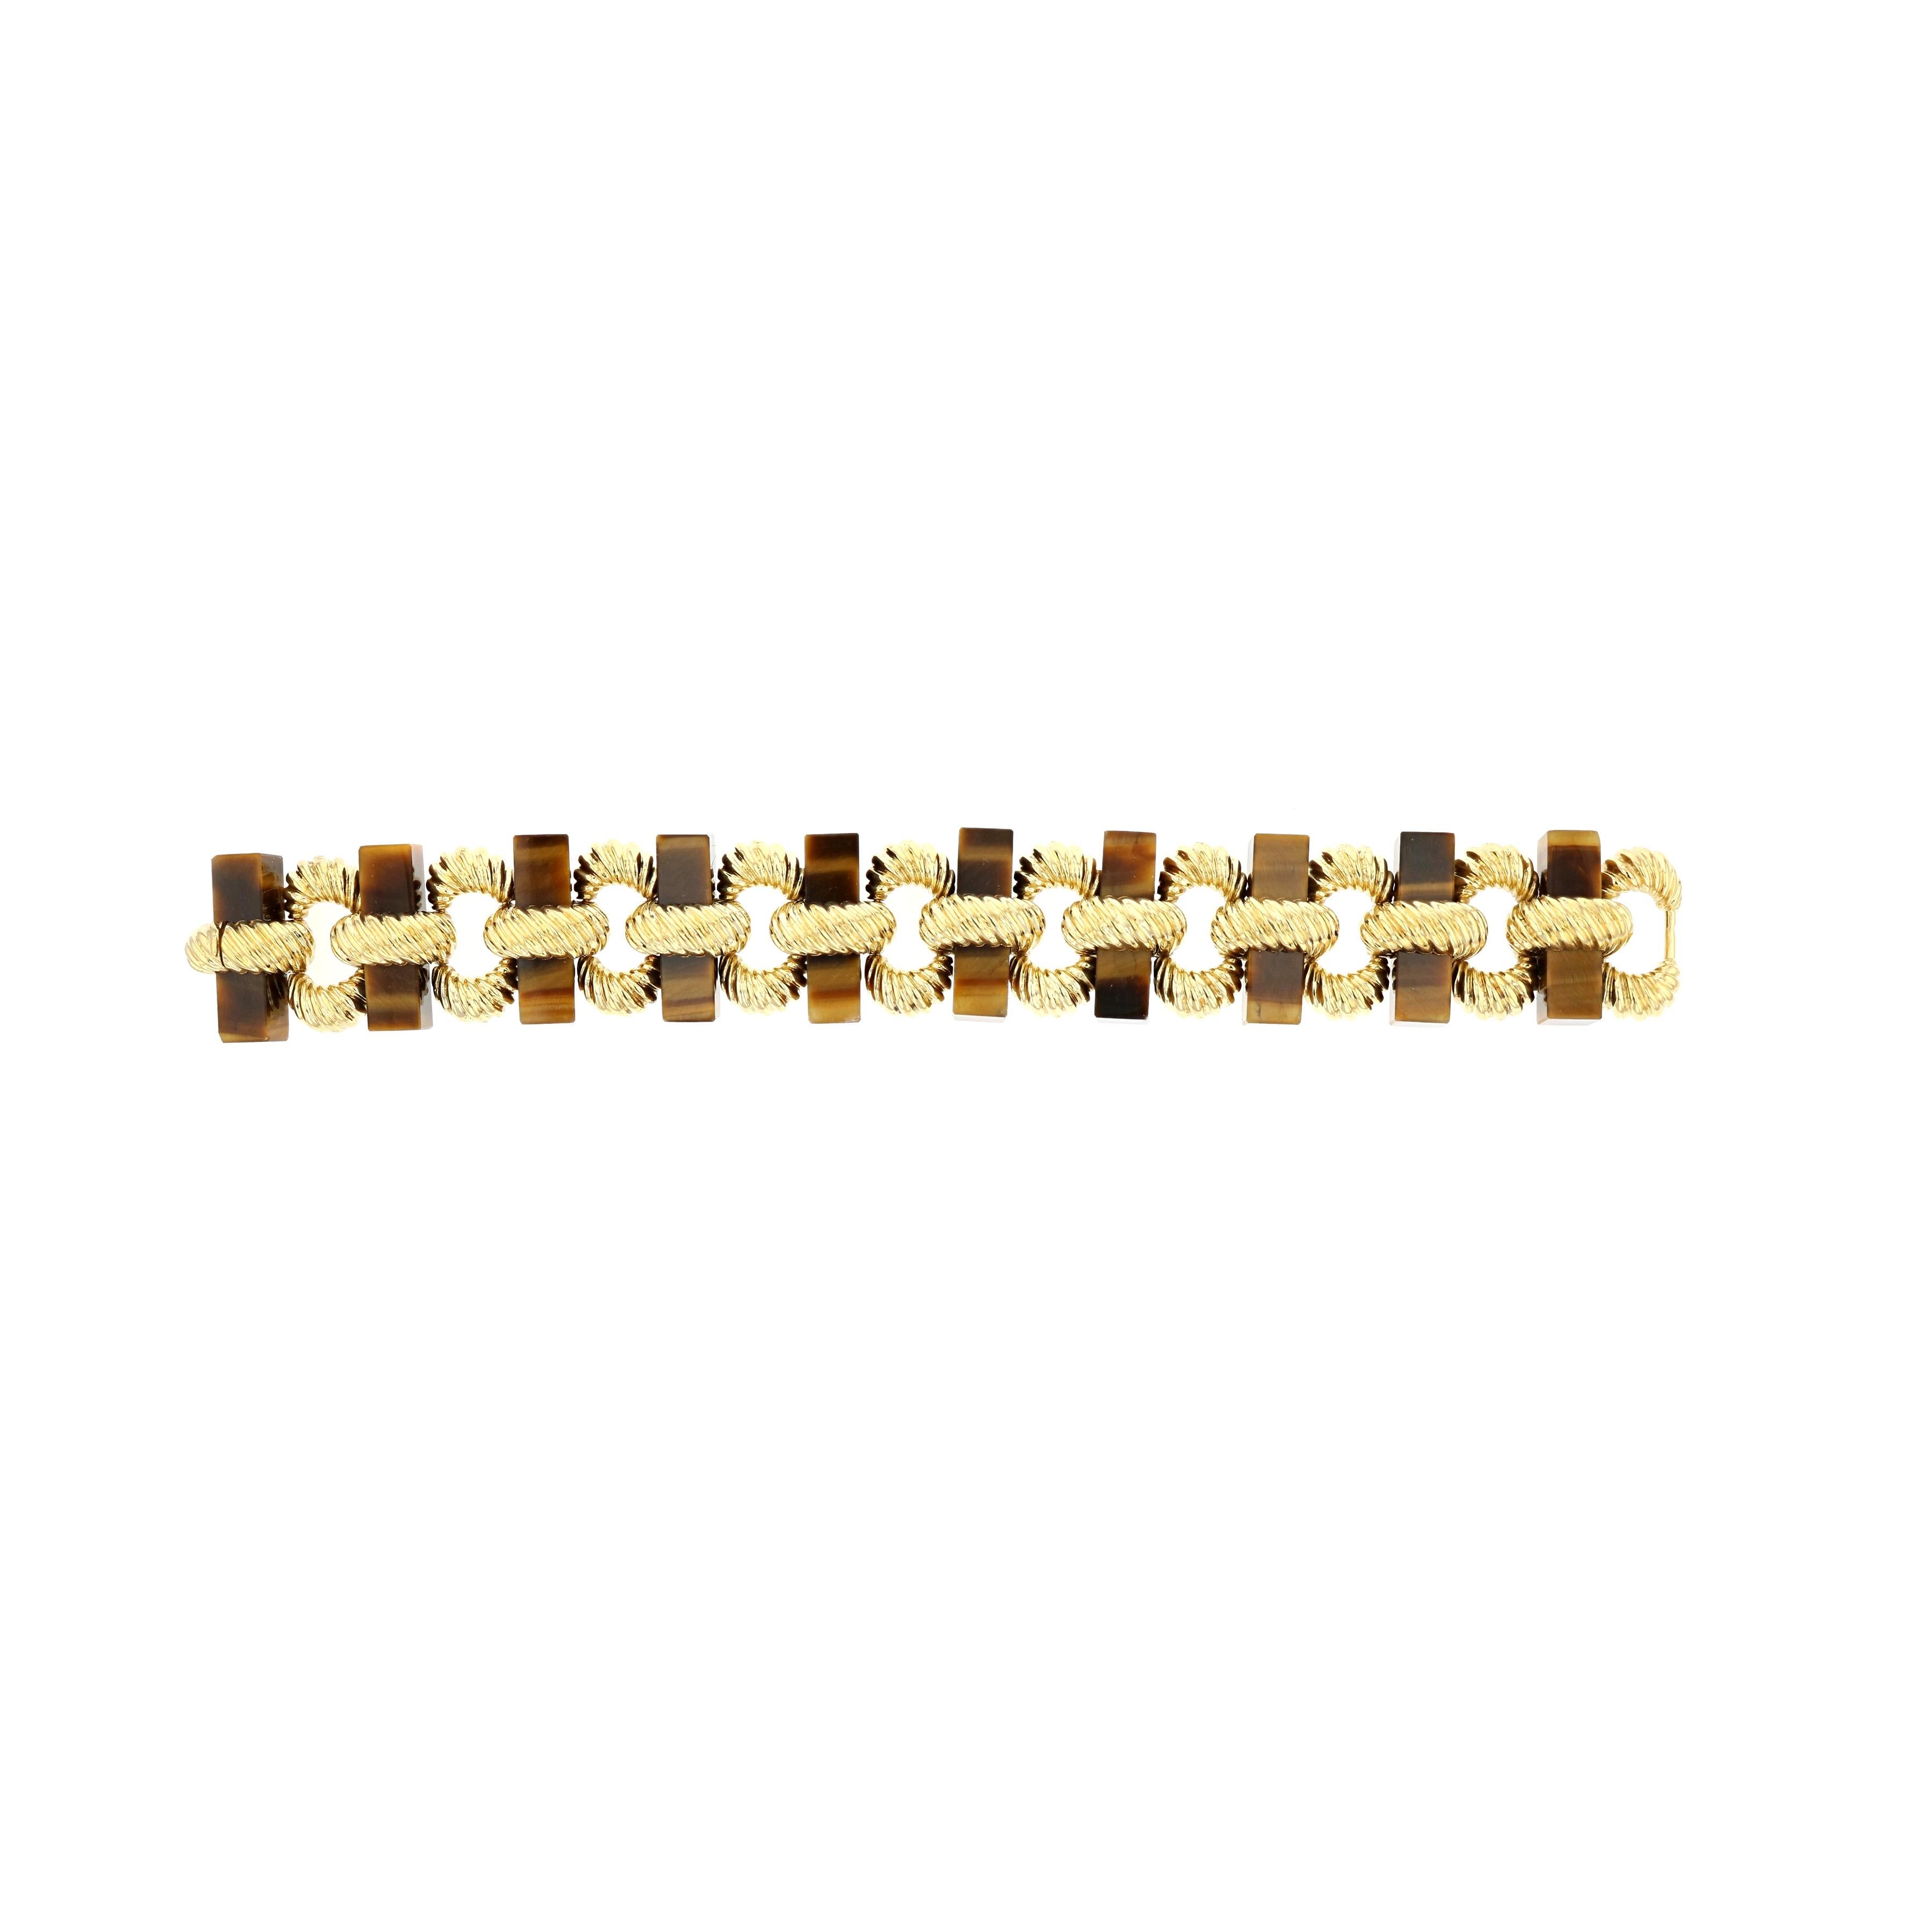 18K yellow gold bracelet with Tiger's Eye bars.  The gold work is ridged with great texture.  Bracelet measures 7 1/2 inches long and 15/16 inches wide.  Circa 1970s.